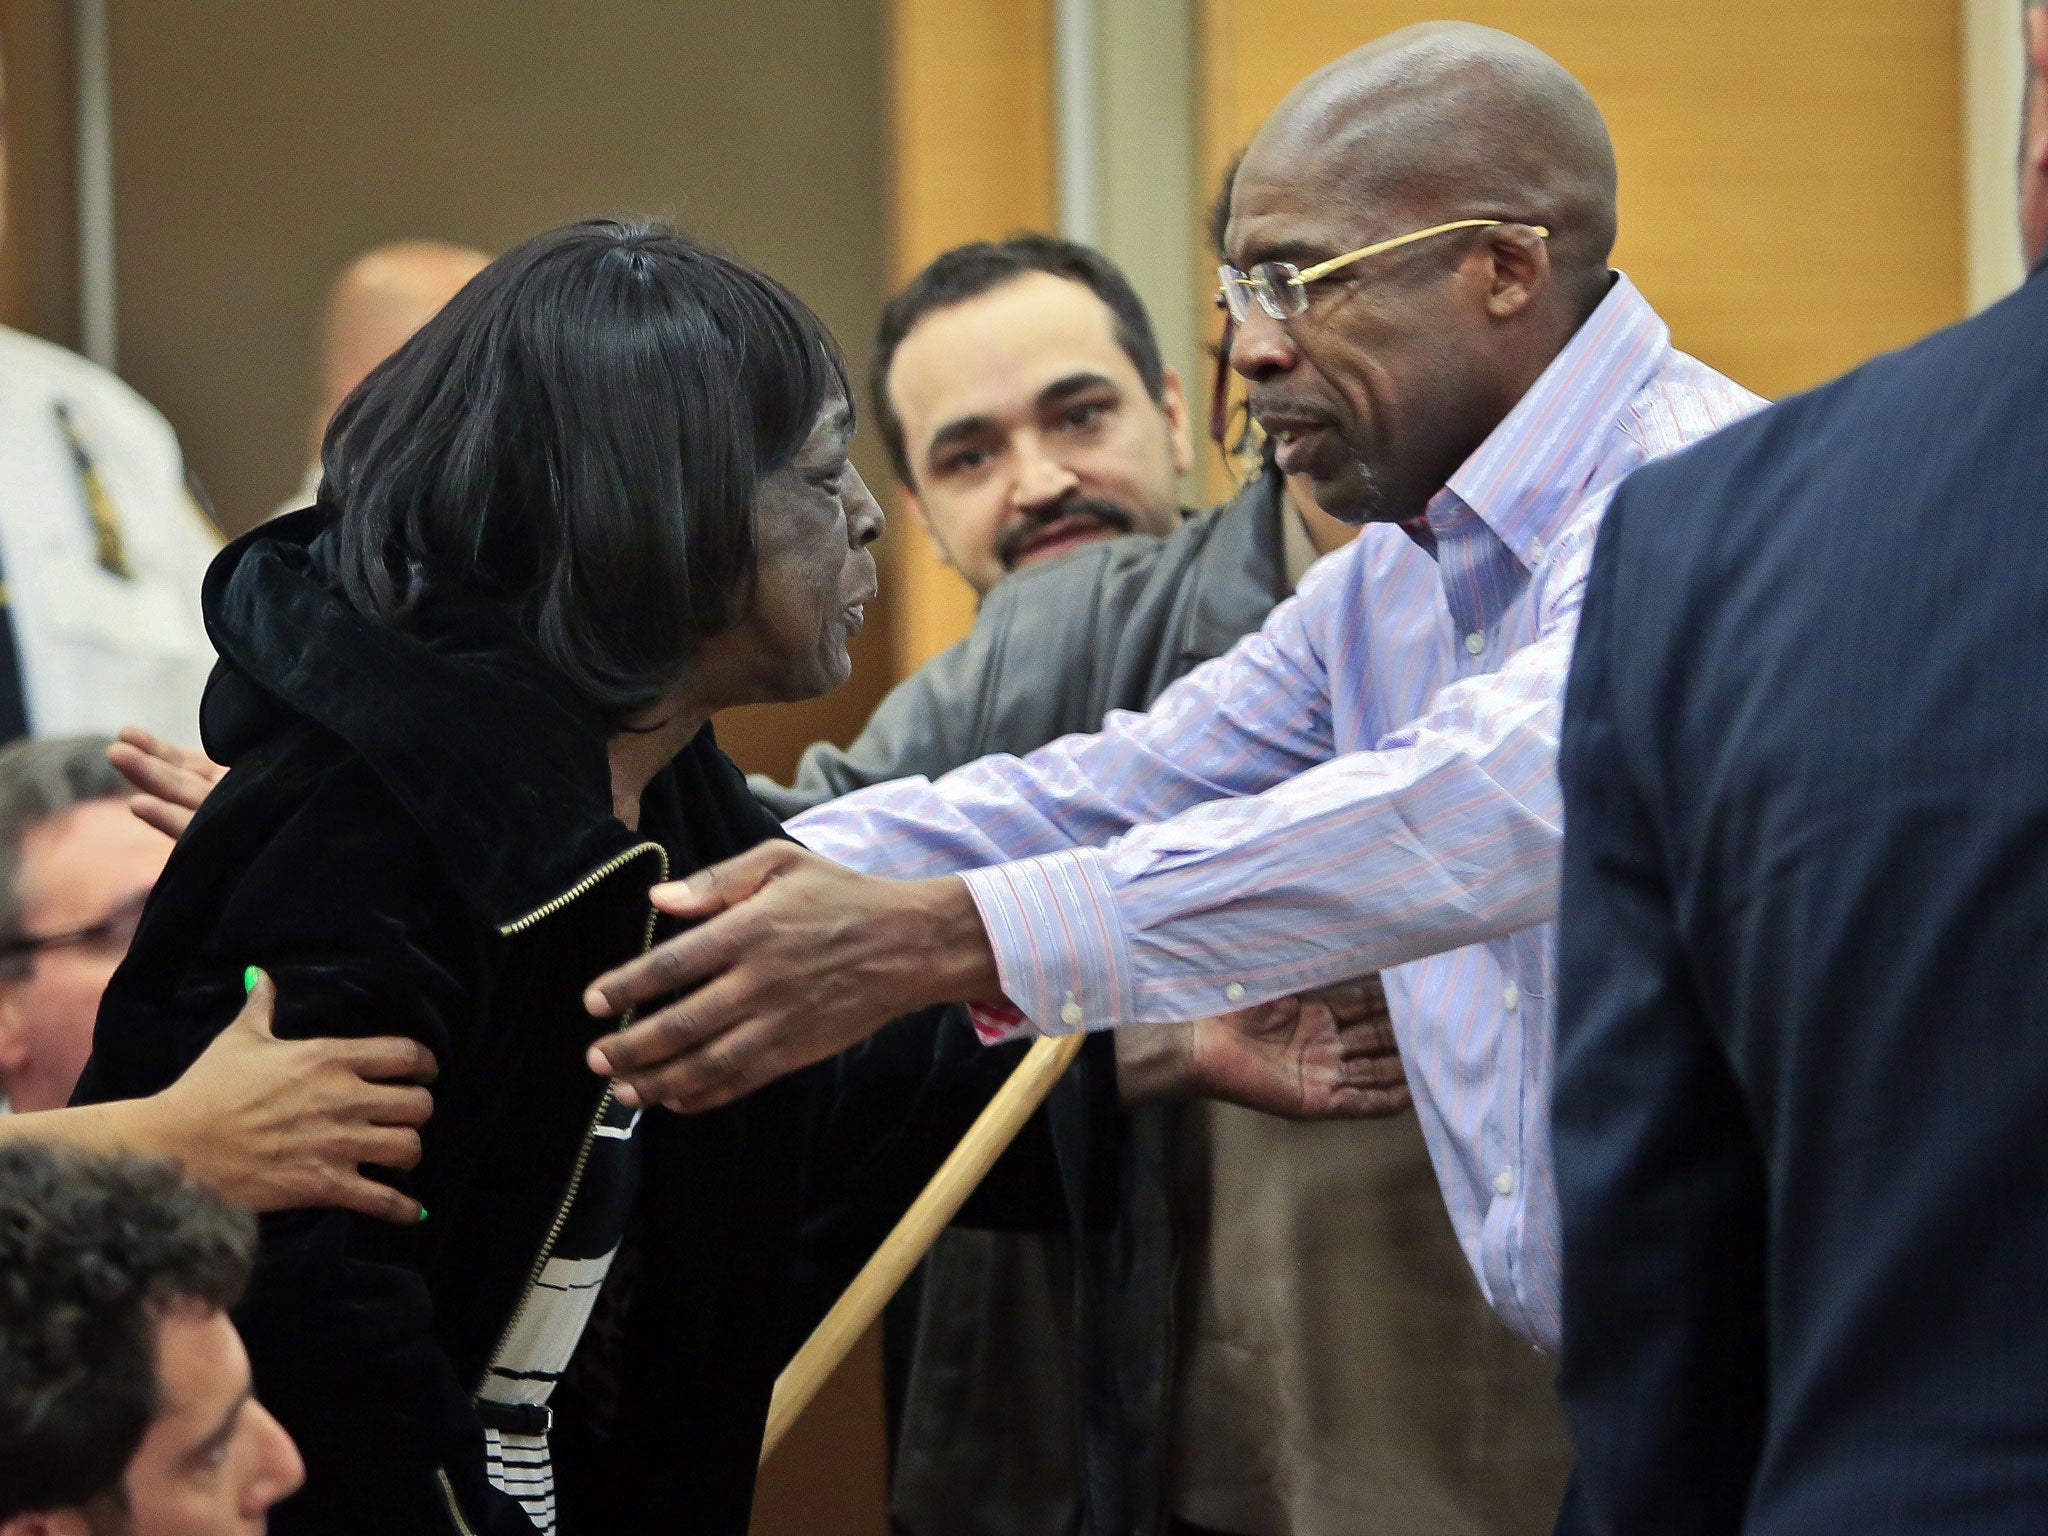 Jonathan Fleming, left, reaches to hug his mother Tricia Fleming in Brooklyn's Supreme court